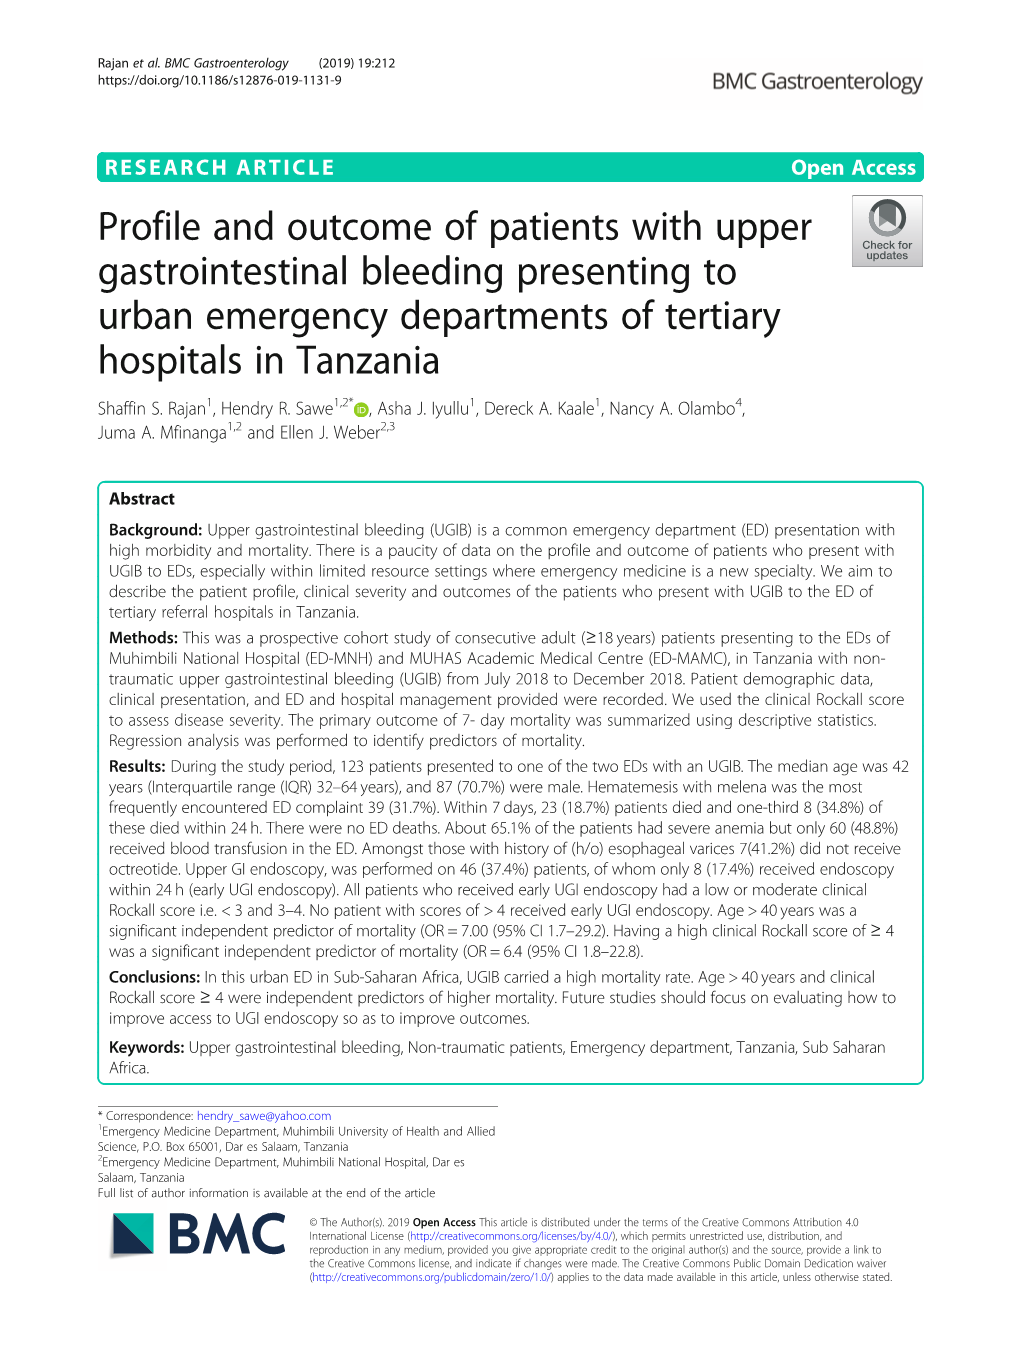 Profile and Outcome of Patients with Upper Gastrointestinal Bleeding Presenting to Urban Emergency Departments of Tertiary Hospitals in Tanzania Shaffin S